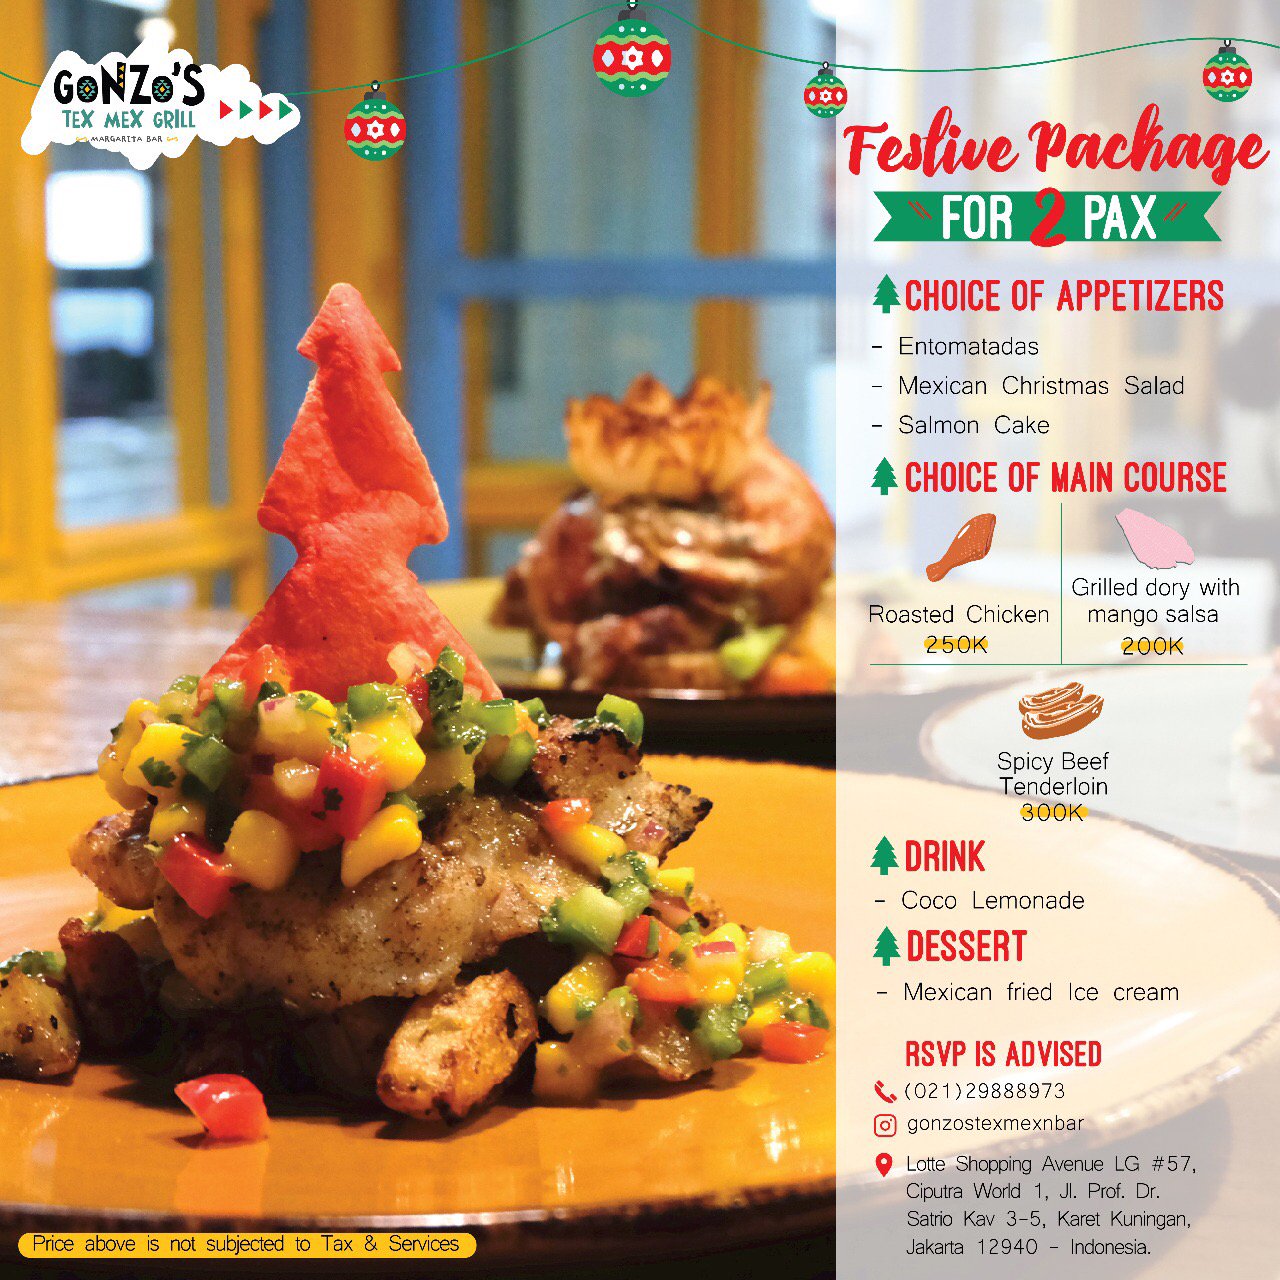 LOTTE MALL Jakarta on Twitter: "Holiday season is coming! eating some good with your beloved ones is a great choice! Tex Mex Grill festive package! try various choices